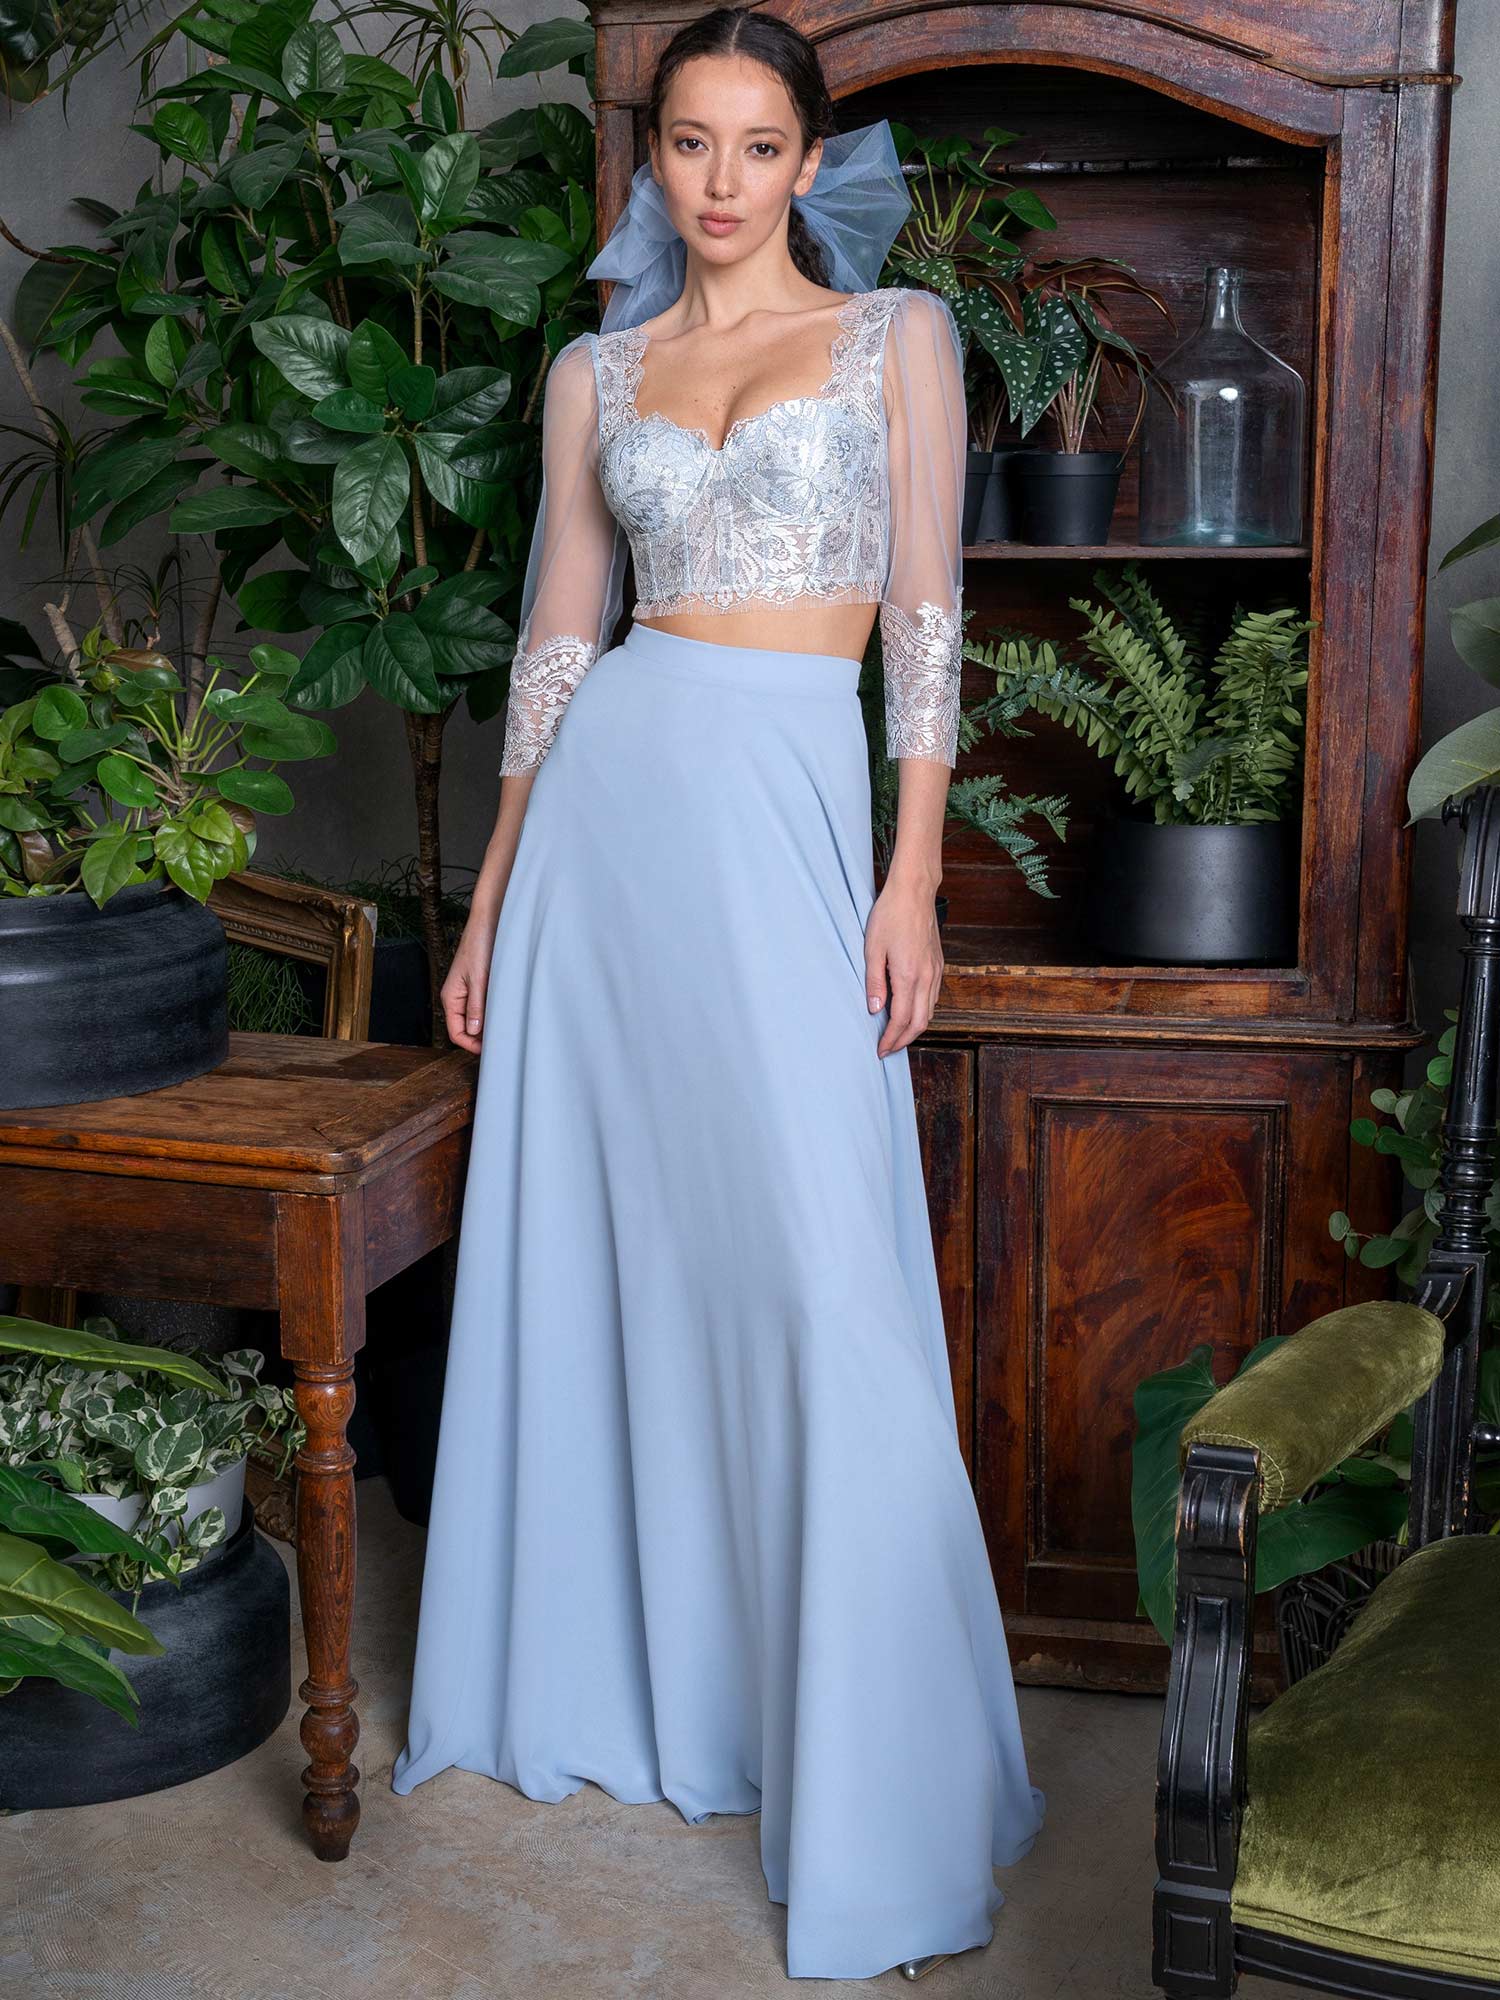 Two-piece lace crop top and chiffon skirt set